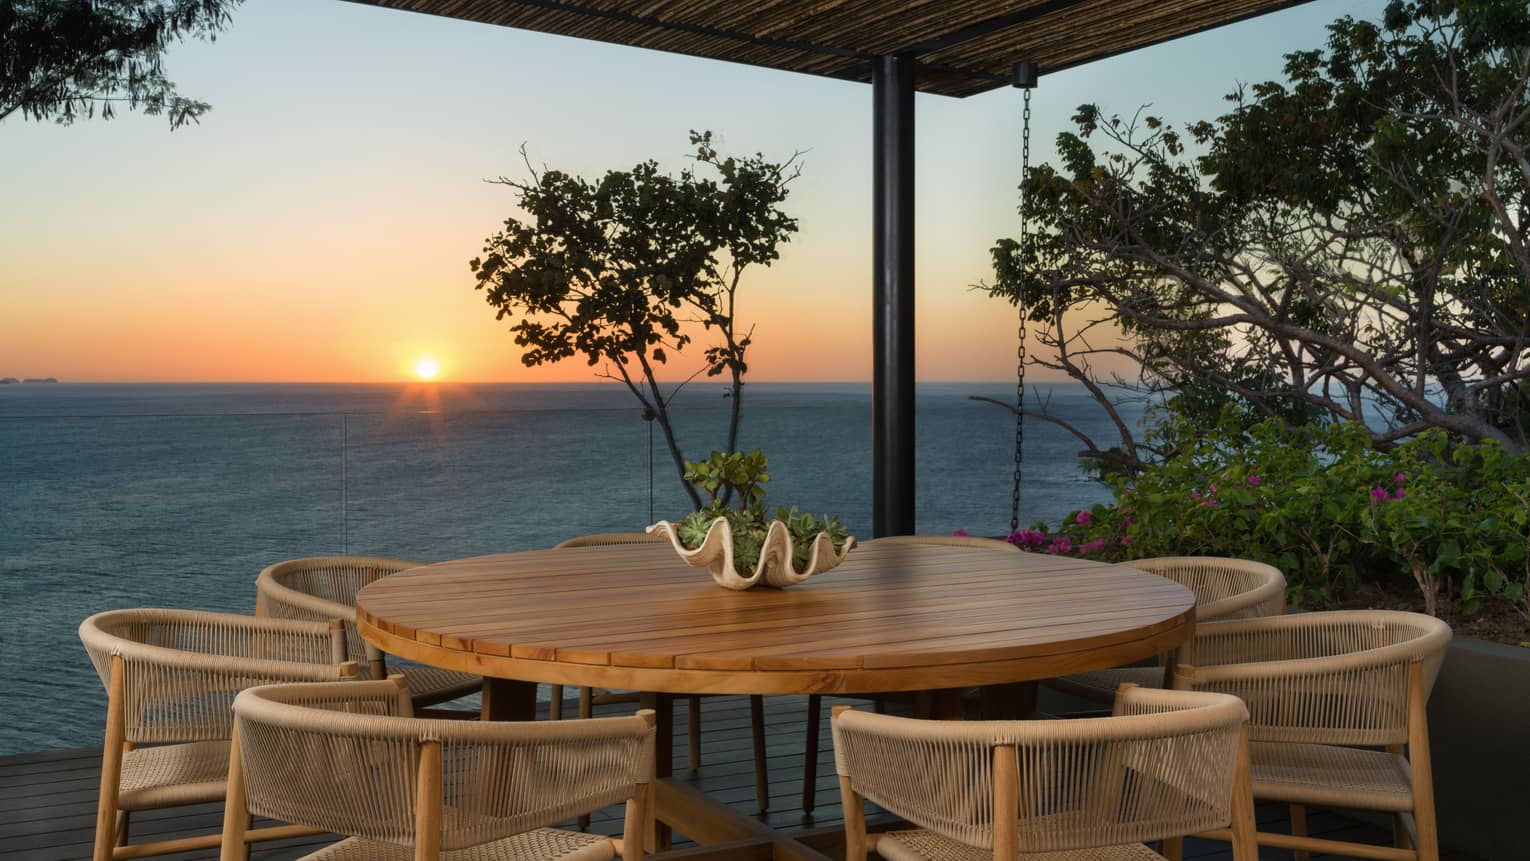 Round outdoor dining table with 6 chairs, sea view